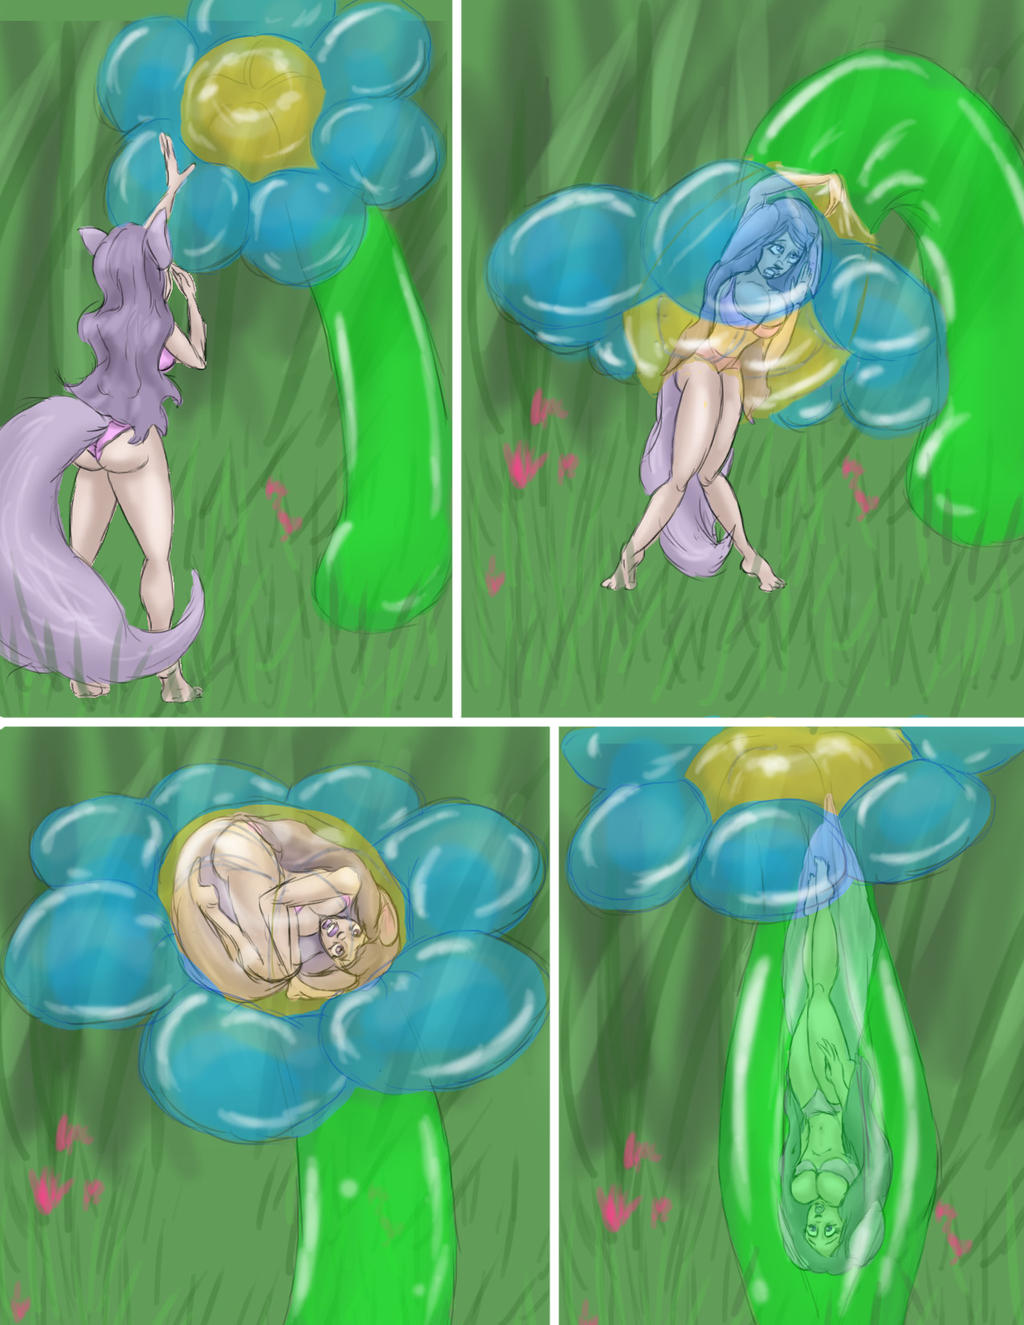 Stop And Smell The Flower Pt 1 By Spartly On DeviantArt 